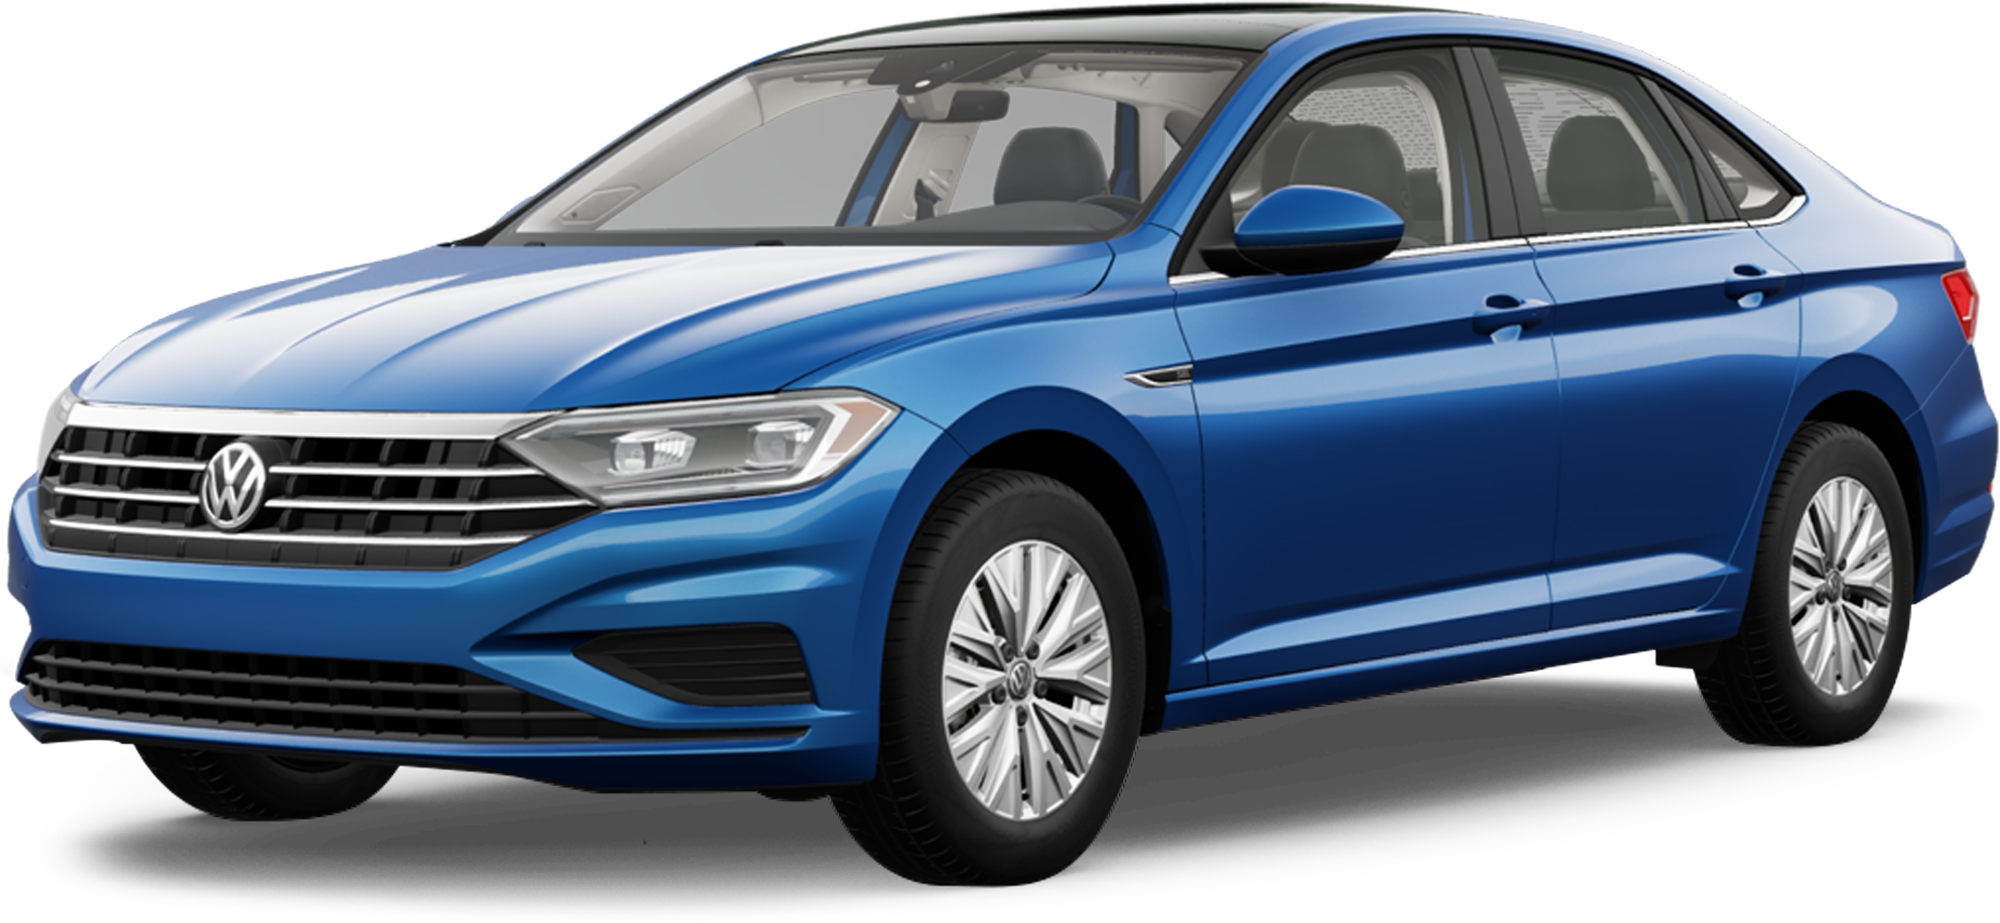 2021 Volkswagen Jetta Incentives, Specials &amp; Offers in West Chester PA